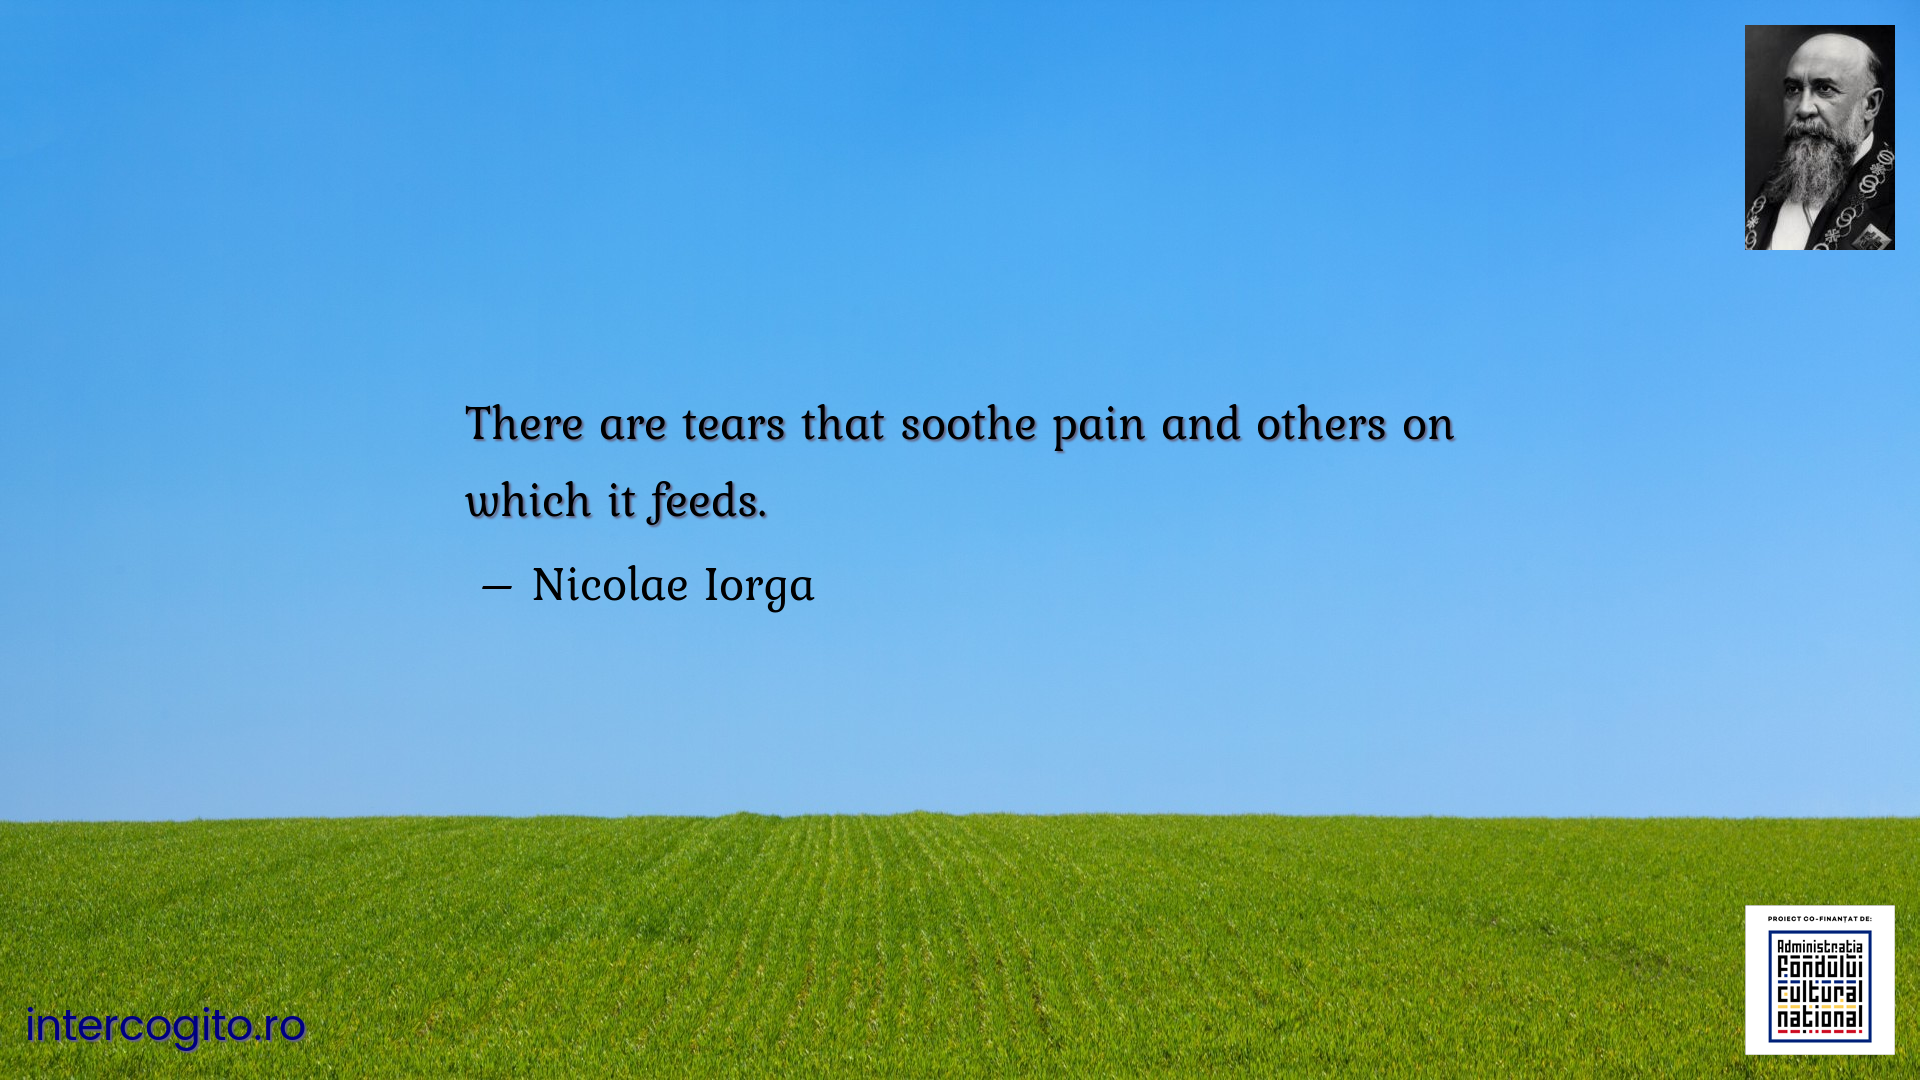 There are tears that soothe pain and others on which it feeds.